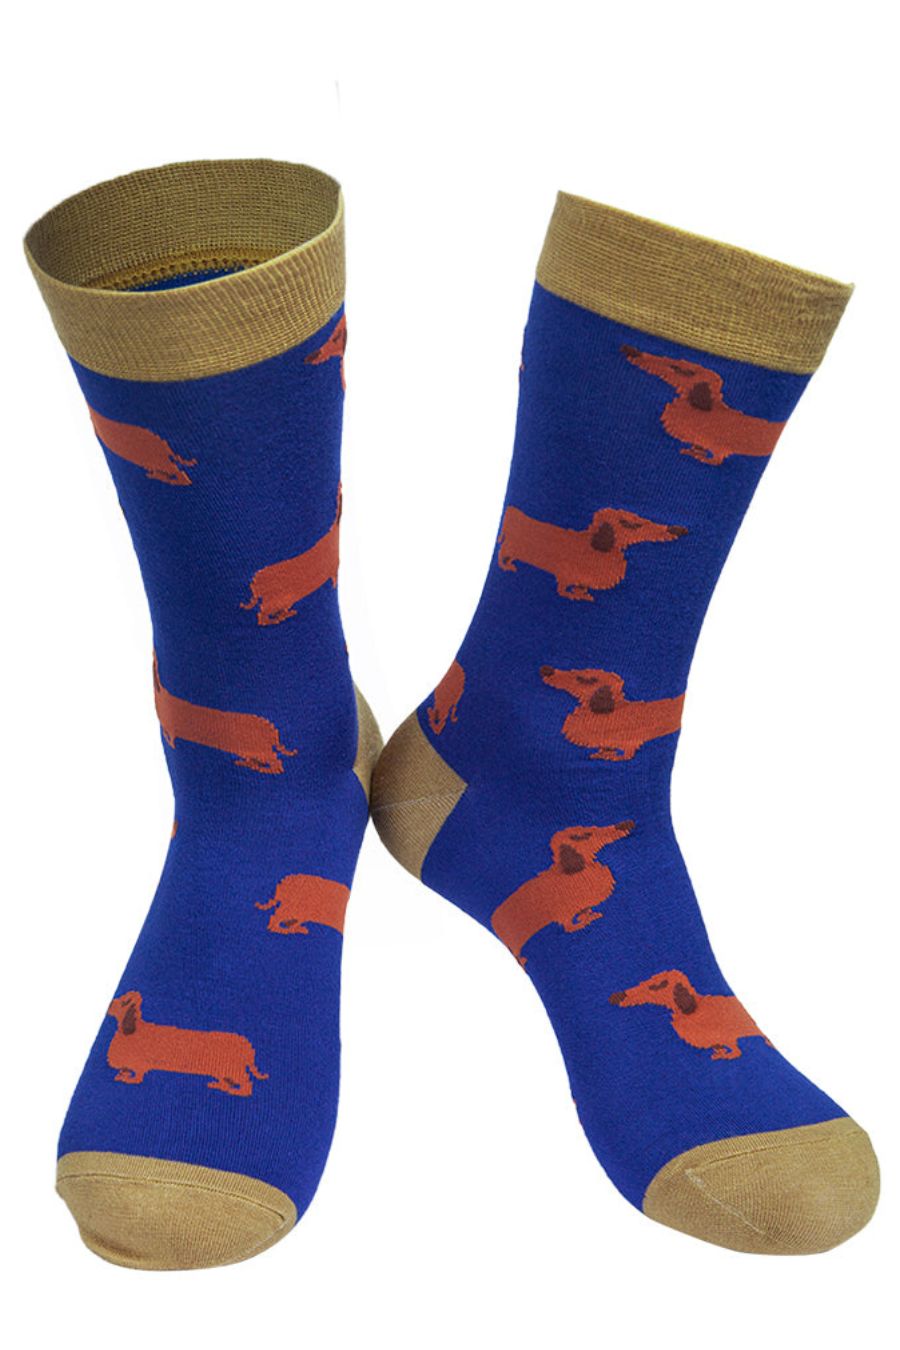 blue and yellow bamboo dress socks with an all over dachshund sausage dog print